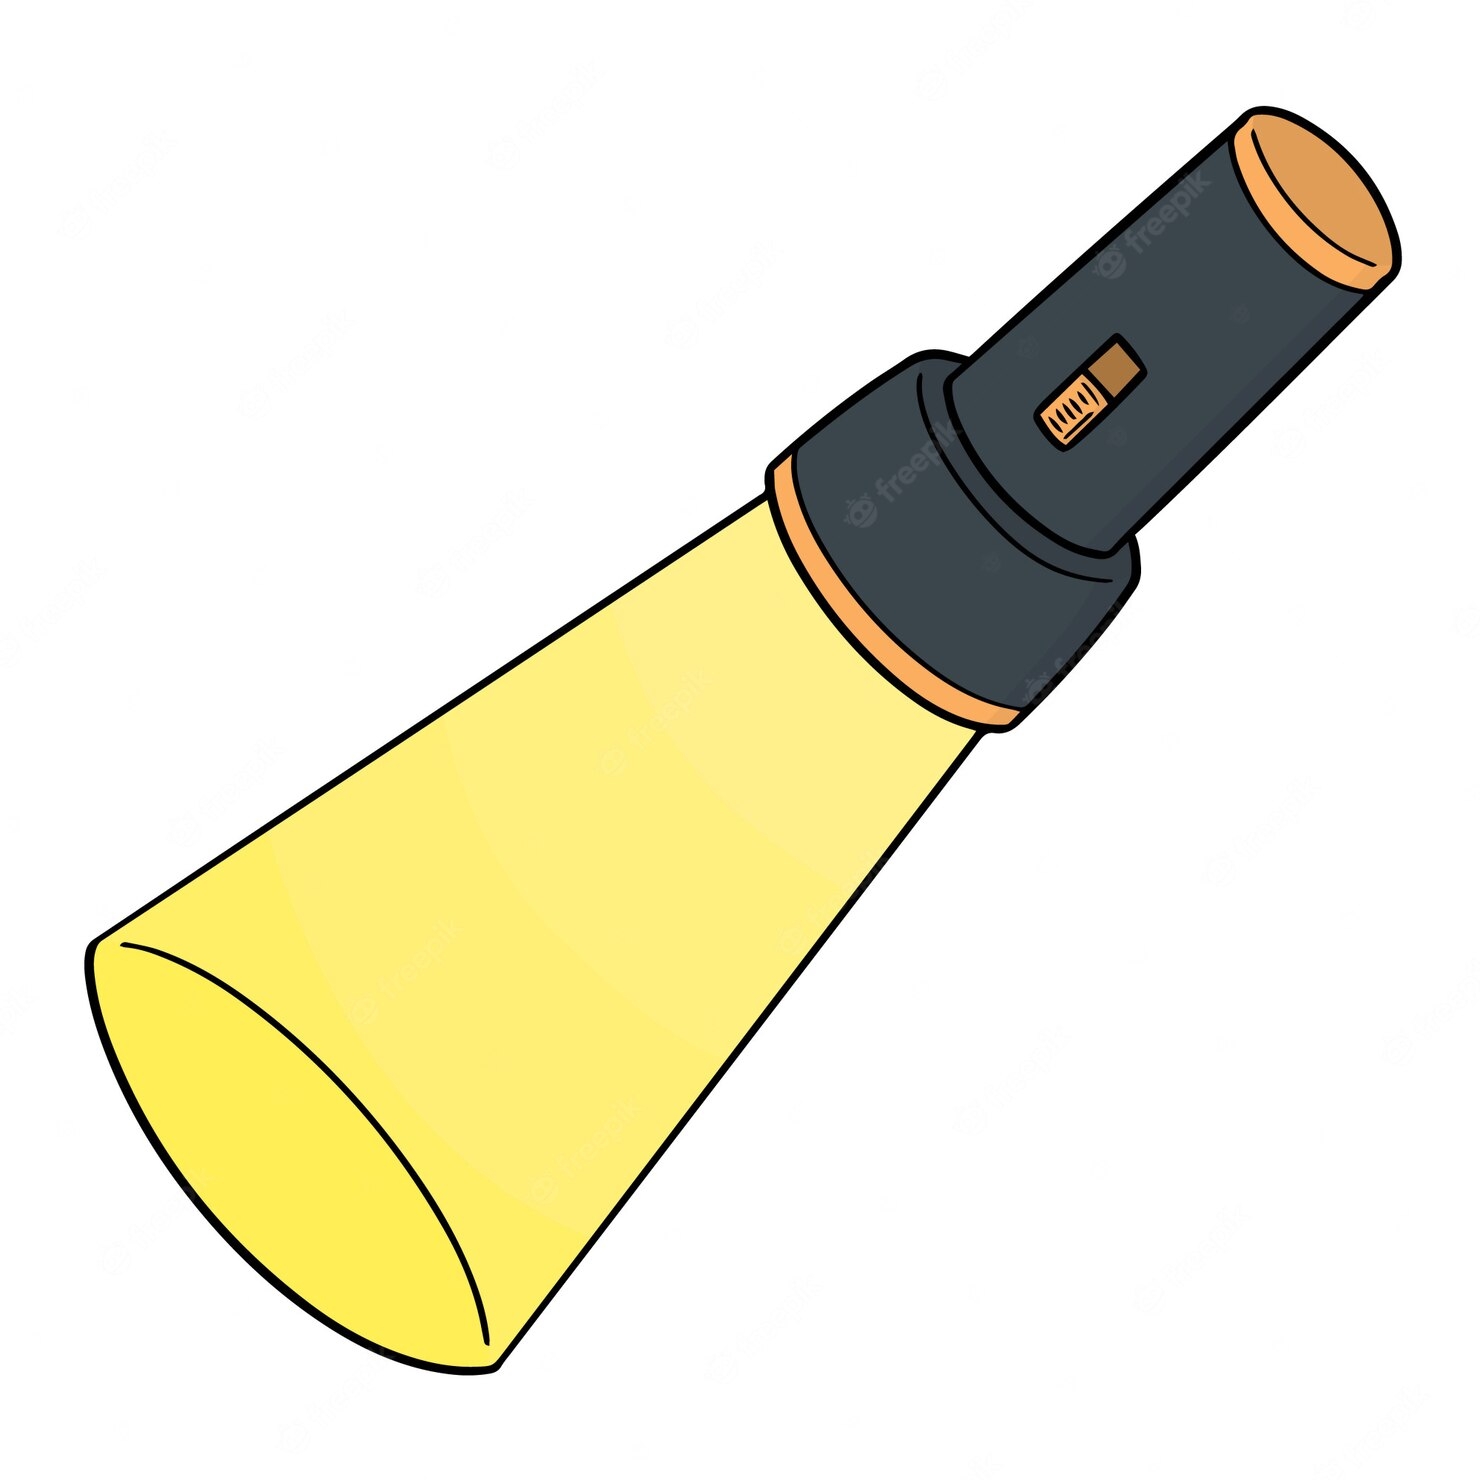 Torch cartoon picture